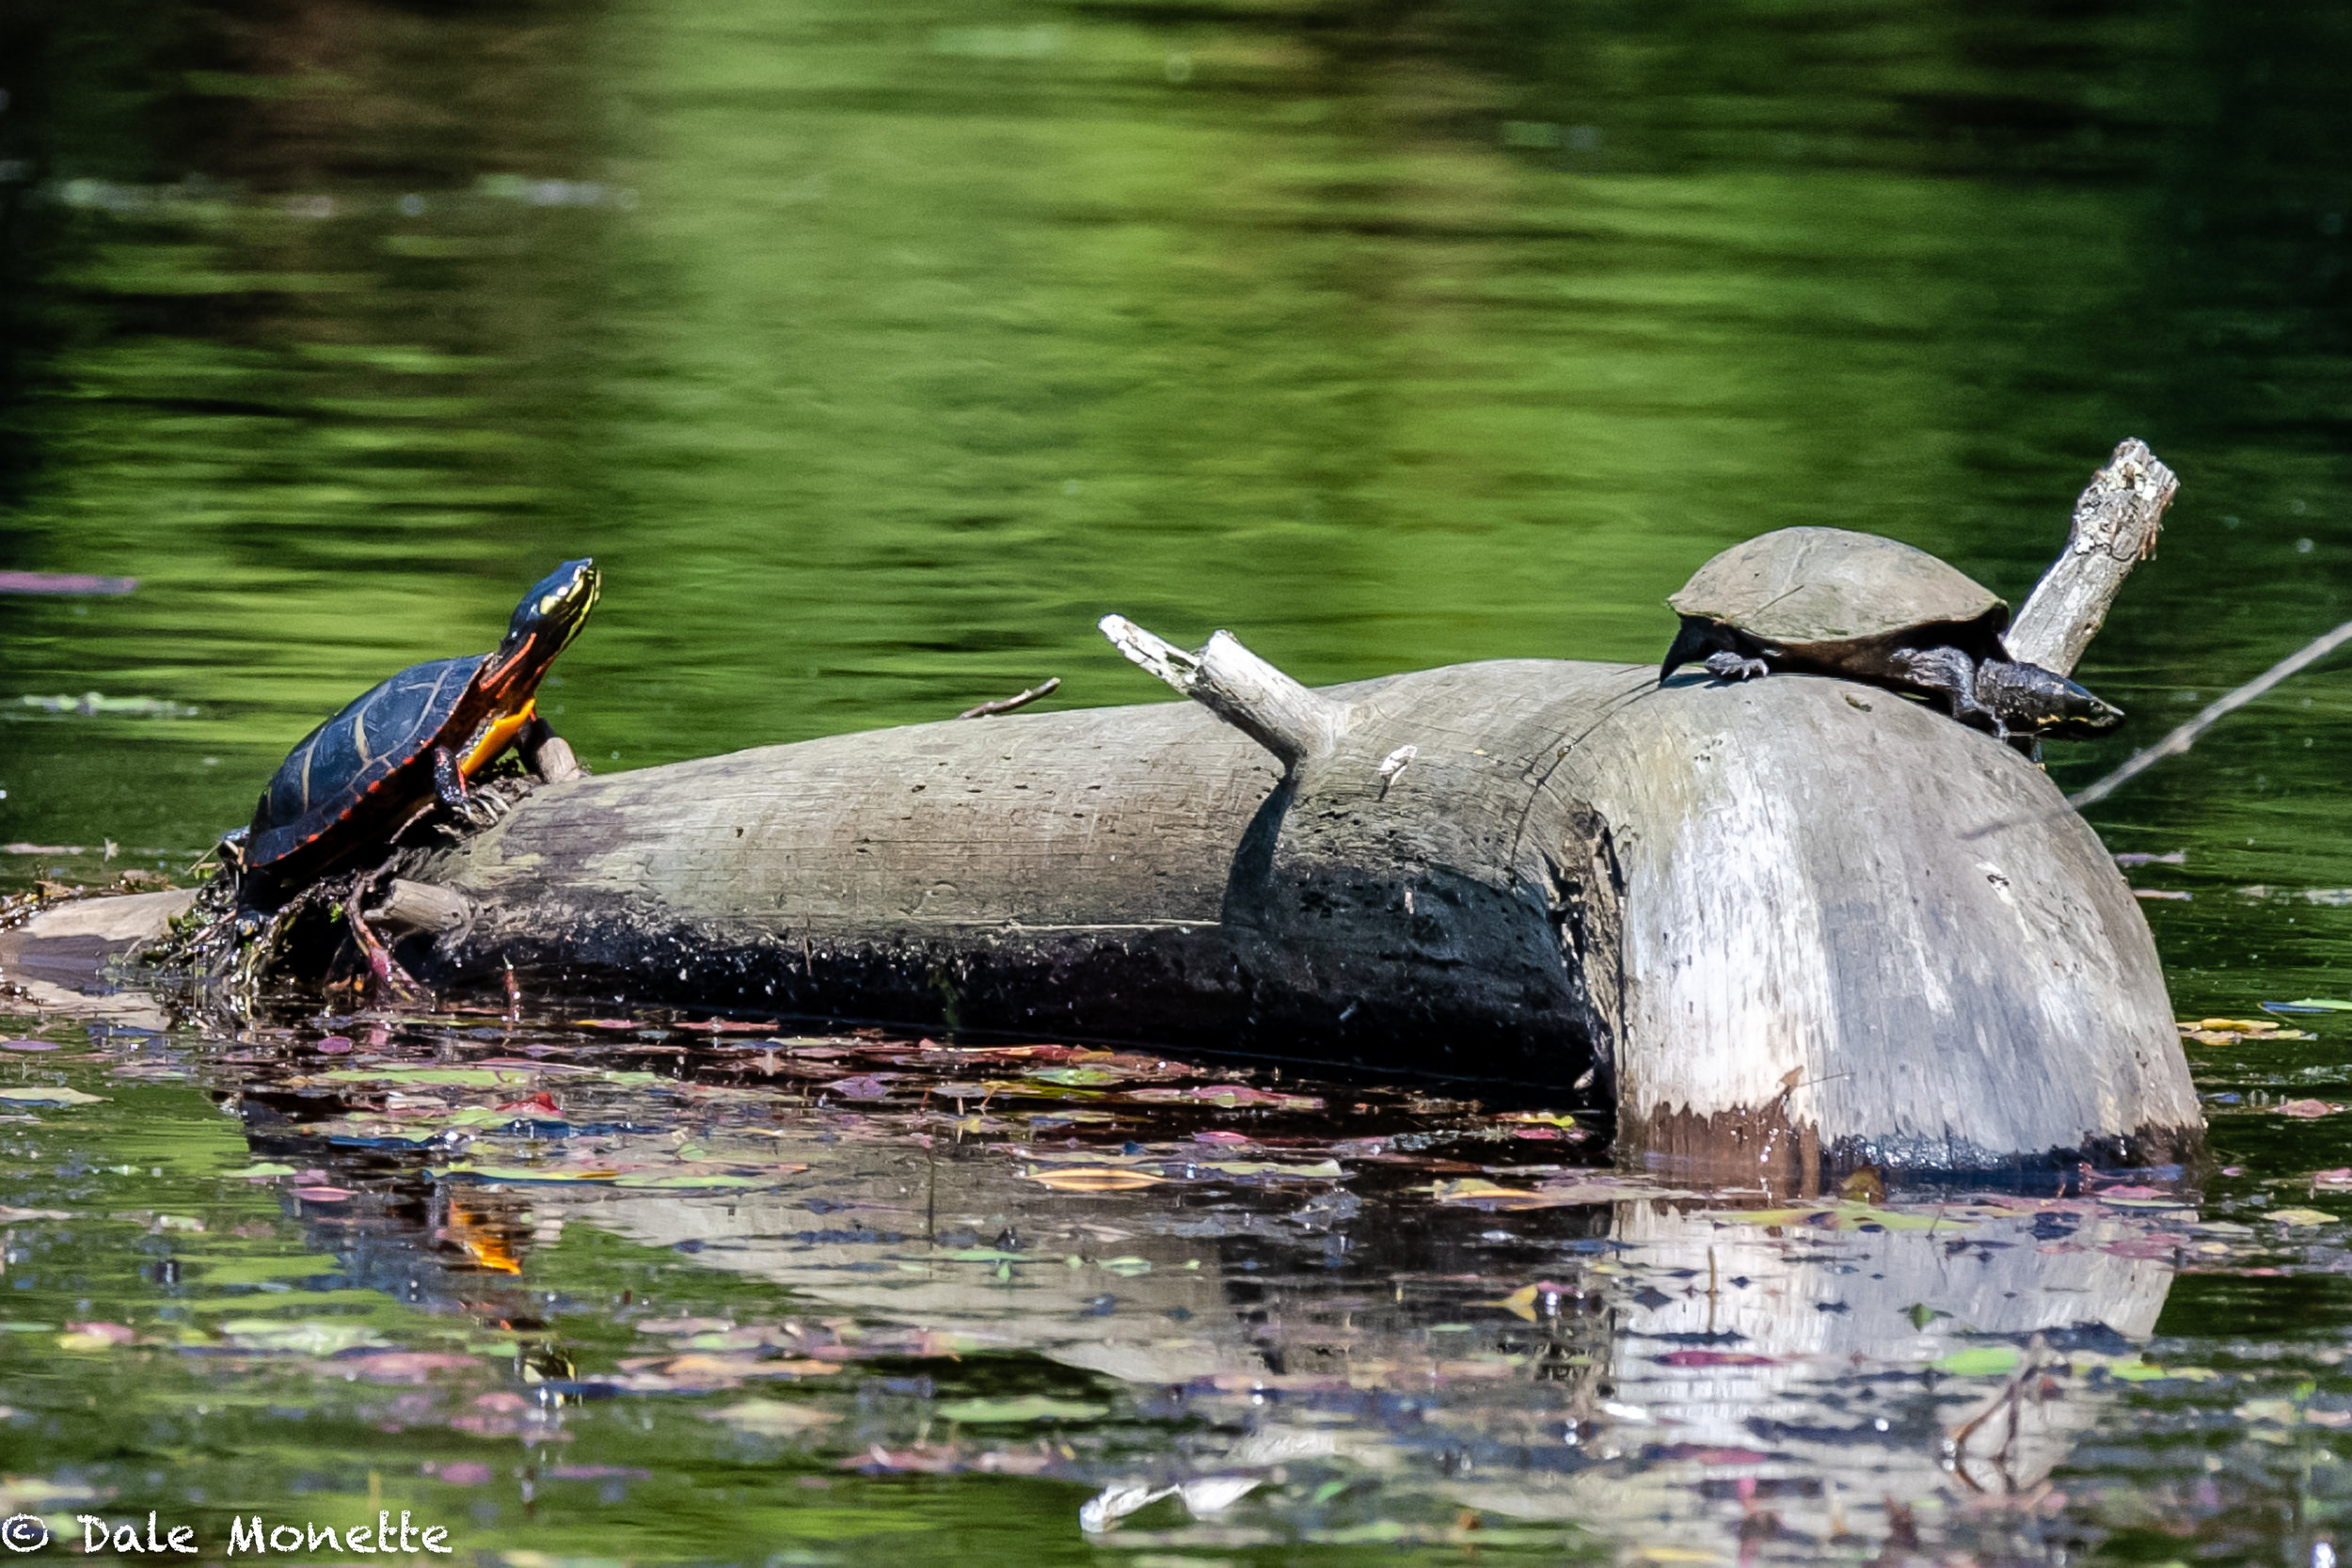   While searching the northern Quabbin today for turtles to photograph, I spotted this musk turtle, or stinkpot, basking on a log. After watching it for about 25 minutes this northern painted turtle joined him. Musky left a few minutes after he appea